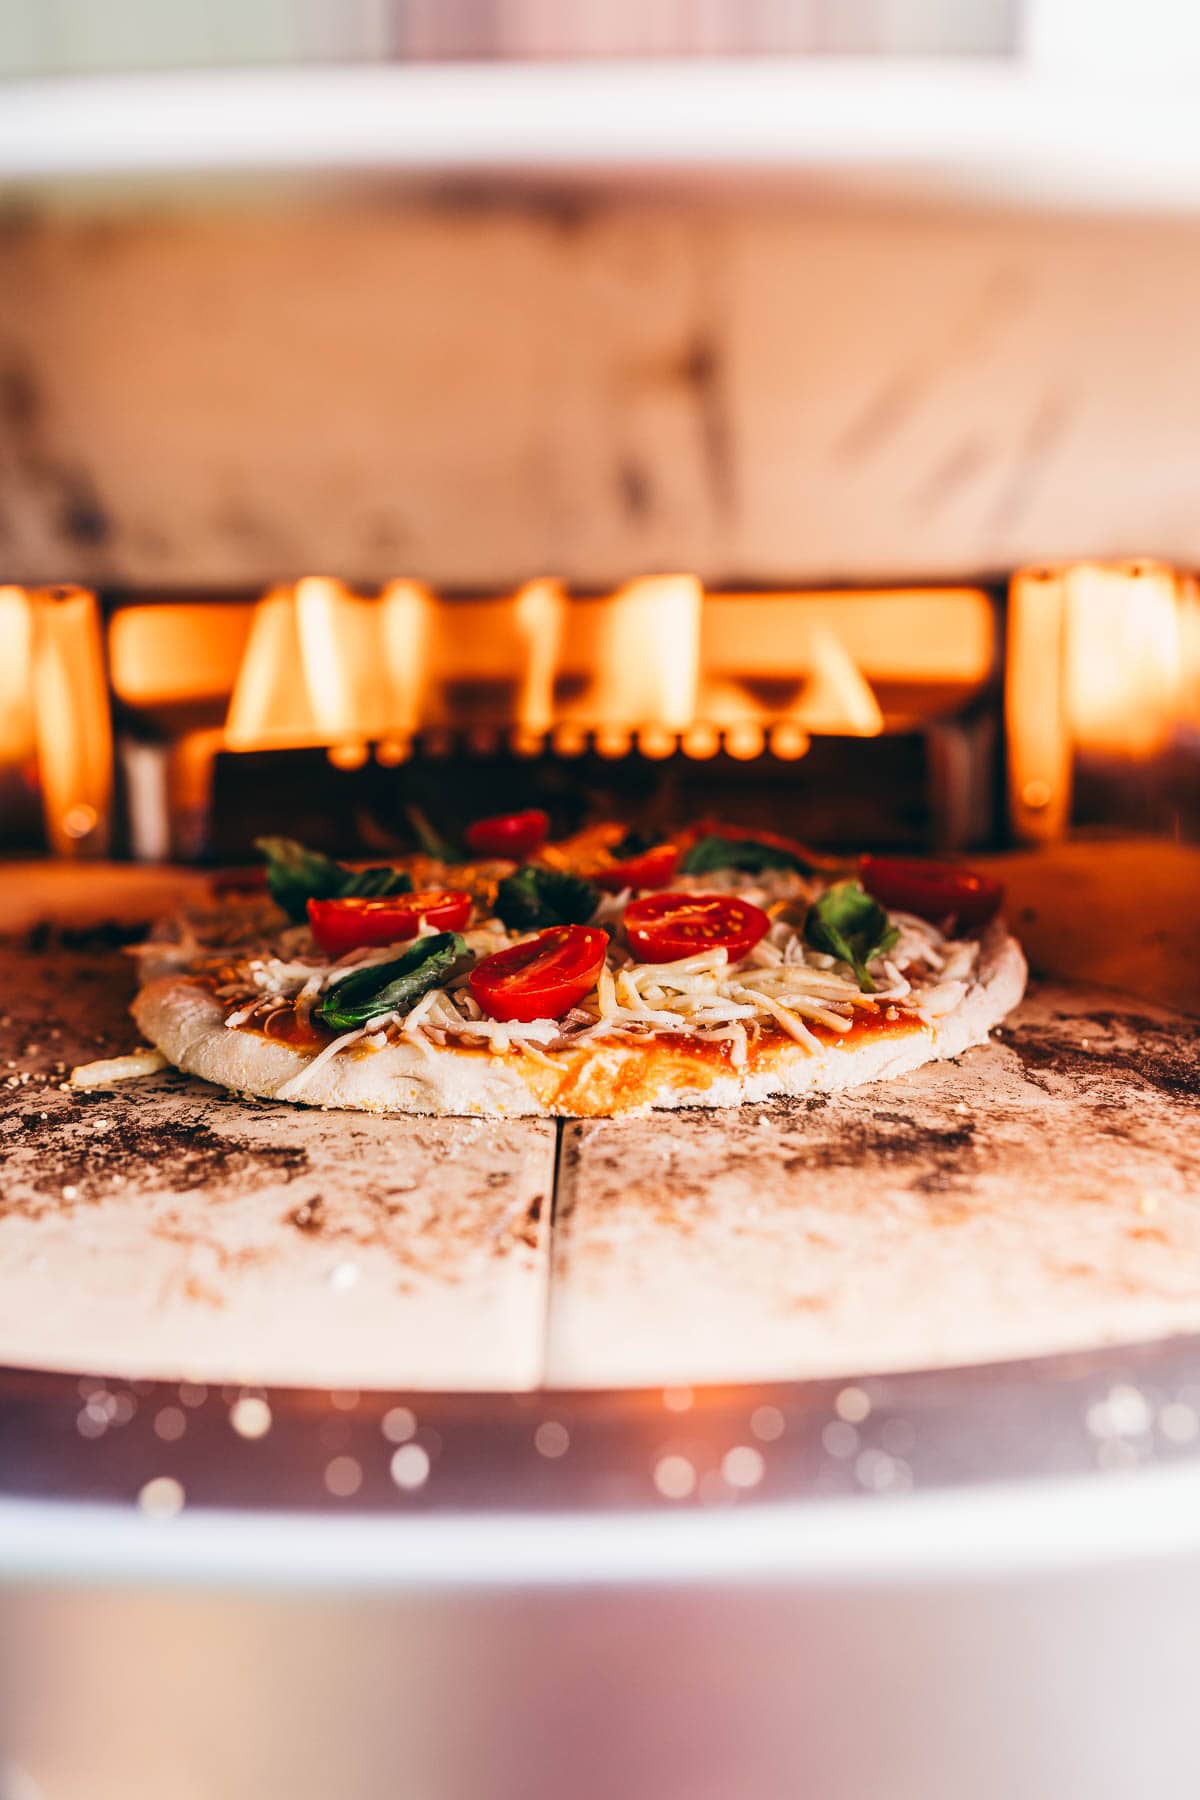 A pizza is being cooked in a Solo Stove pizza oven.